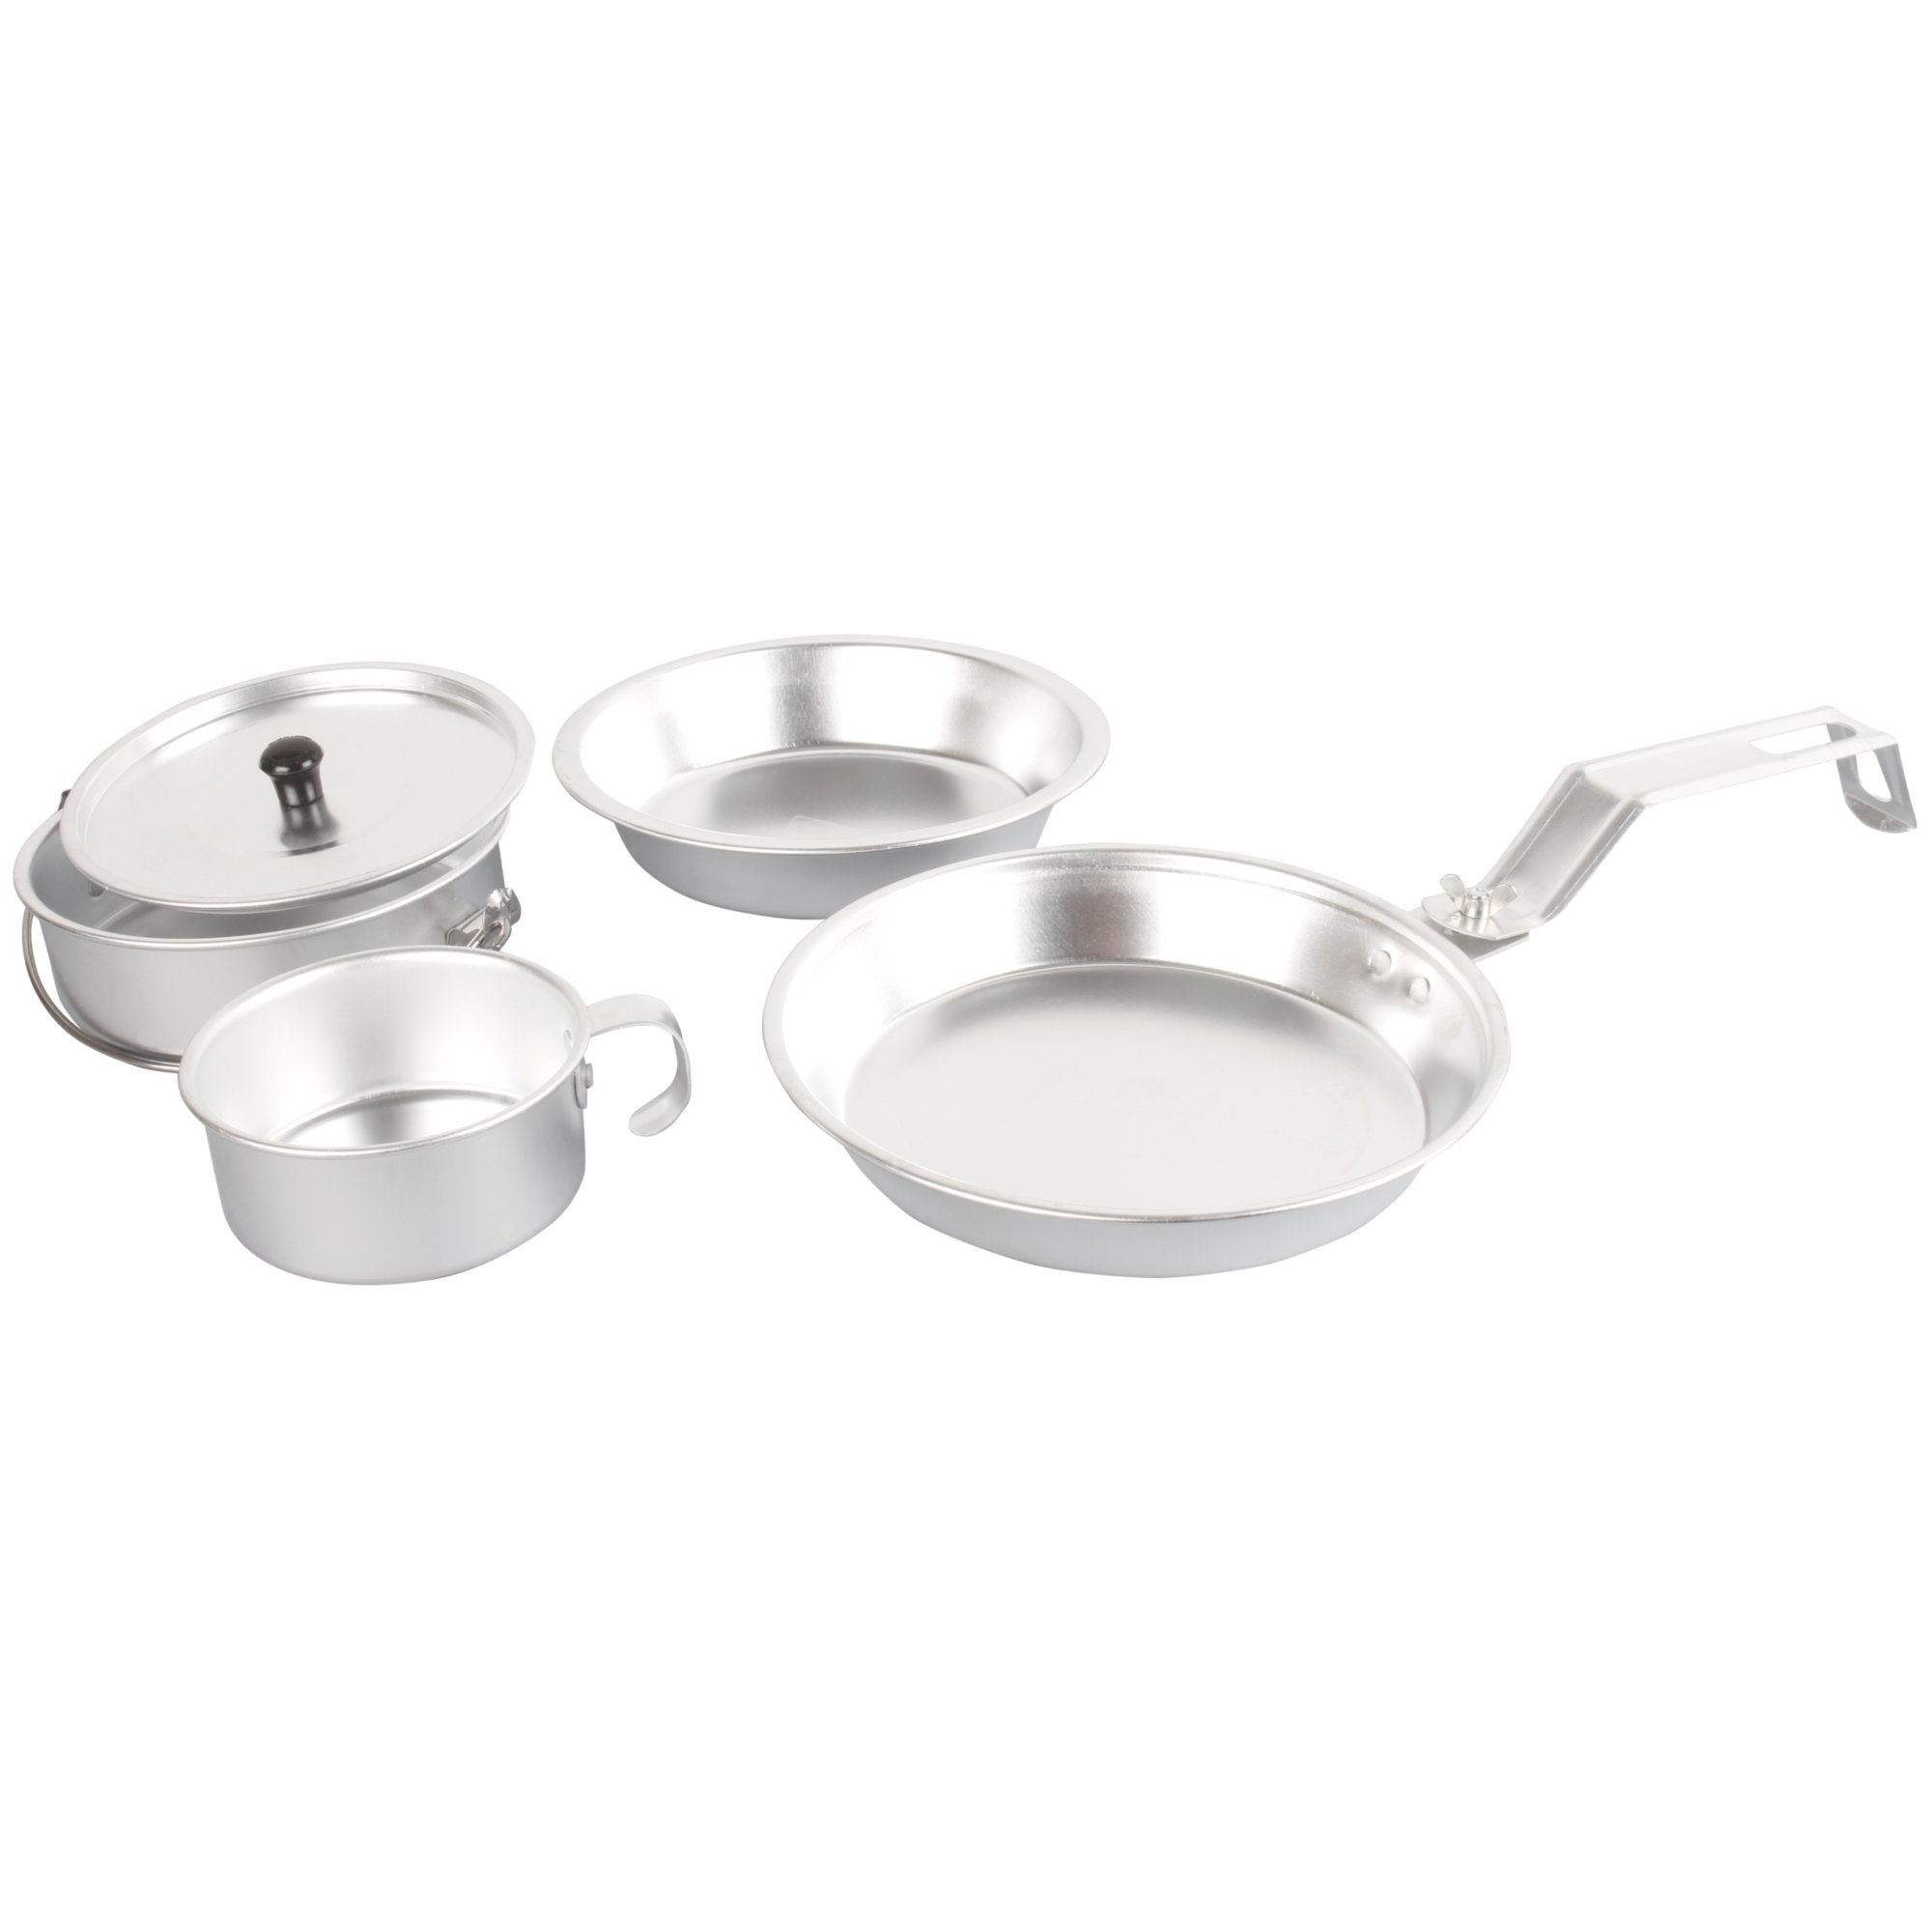 Mintage Stainless Steel Kitchen Kit, for Home